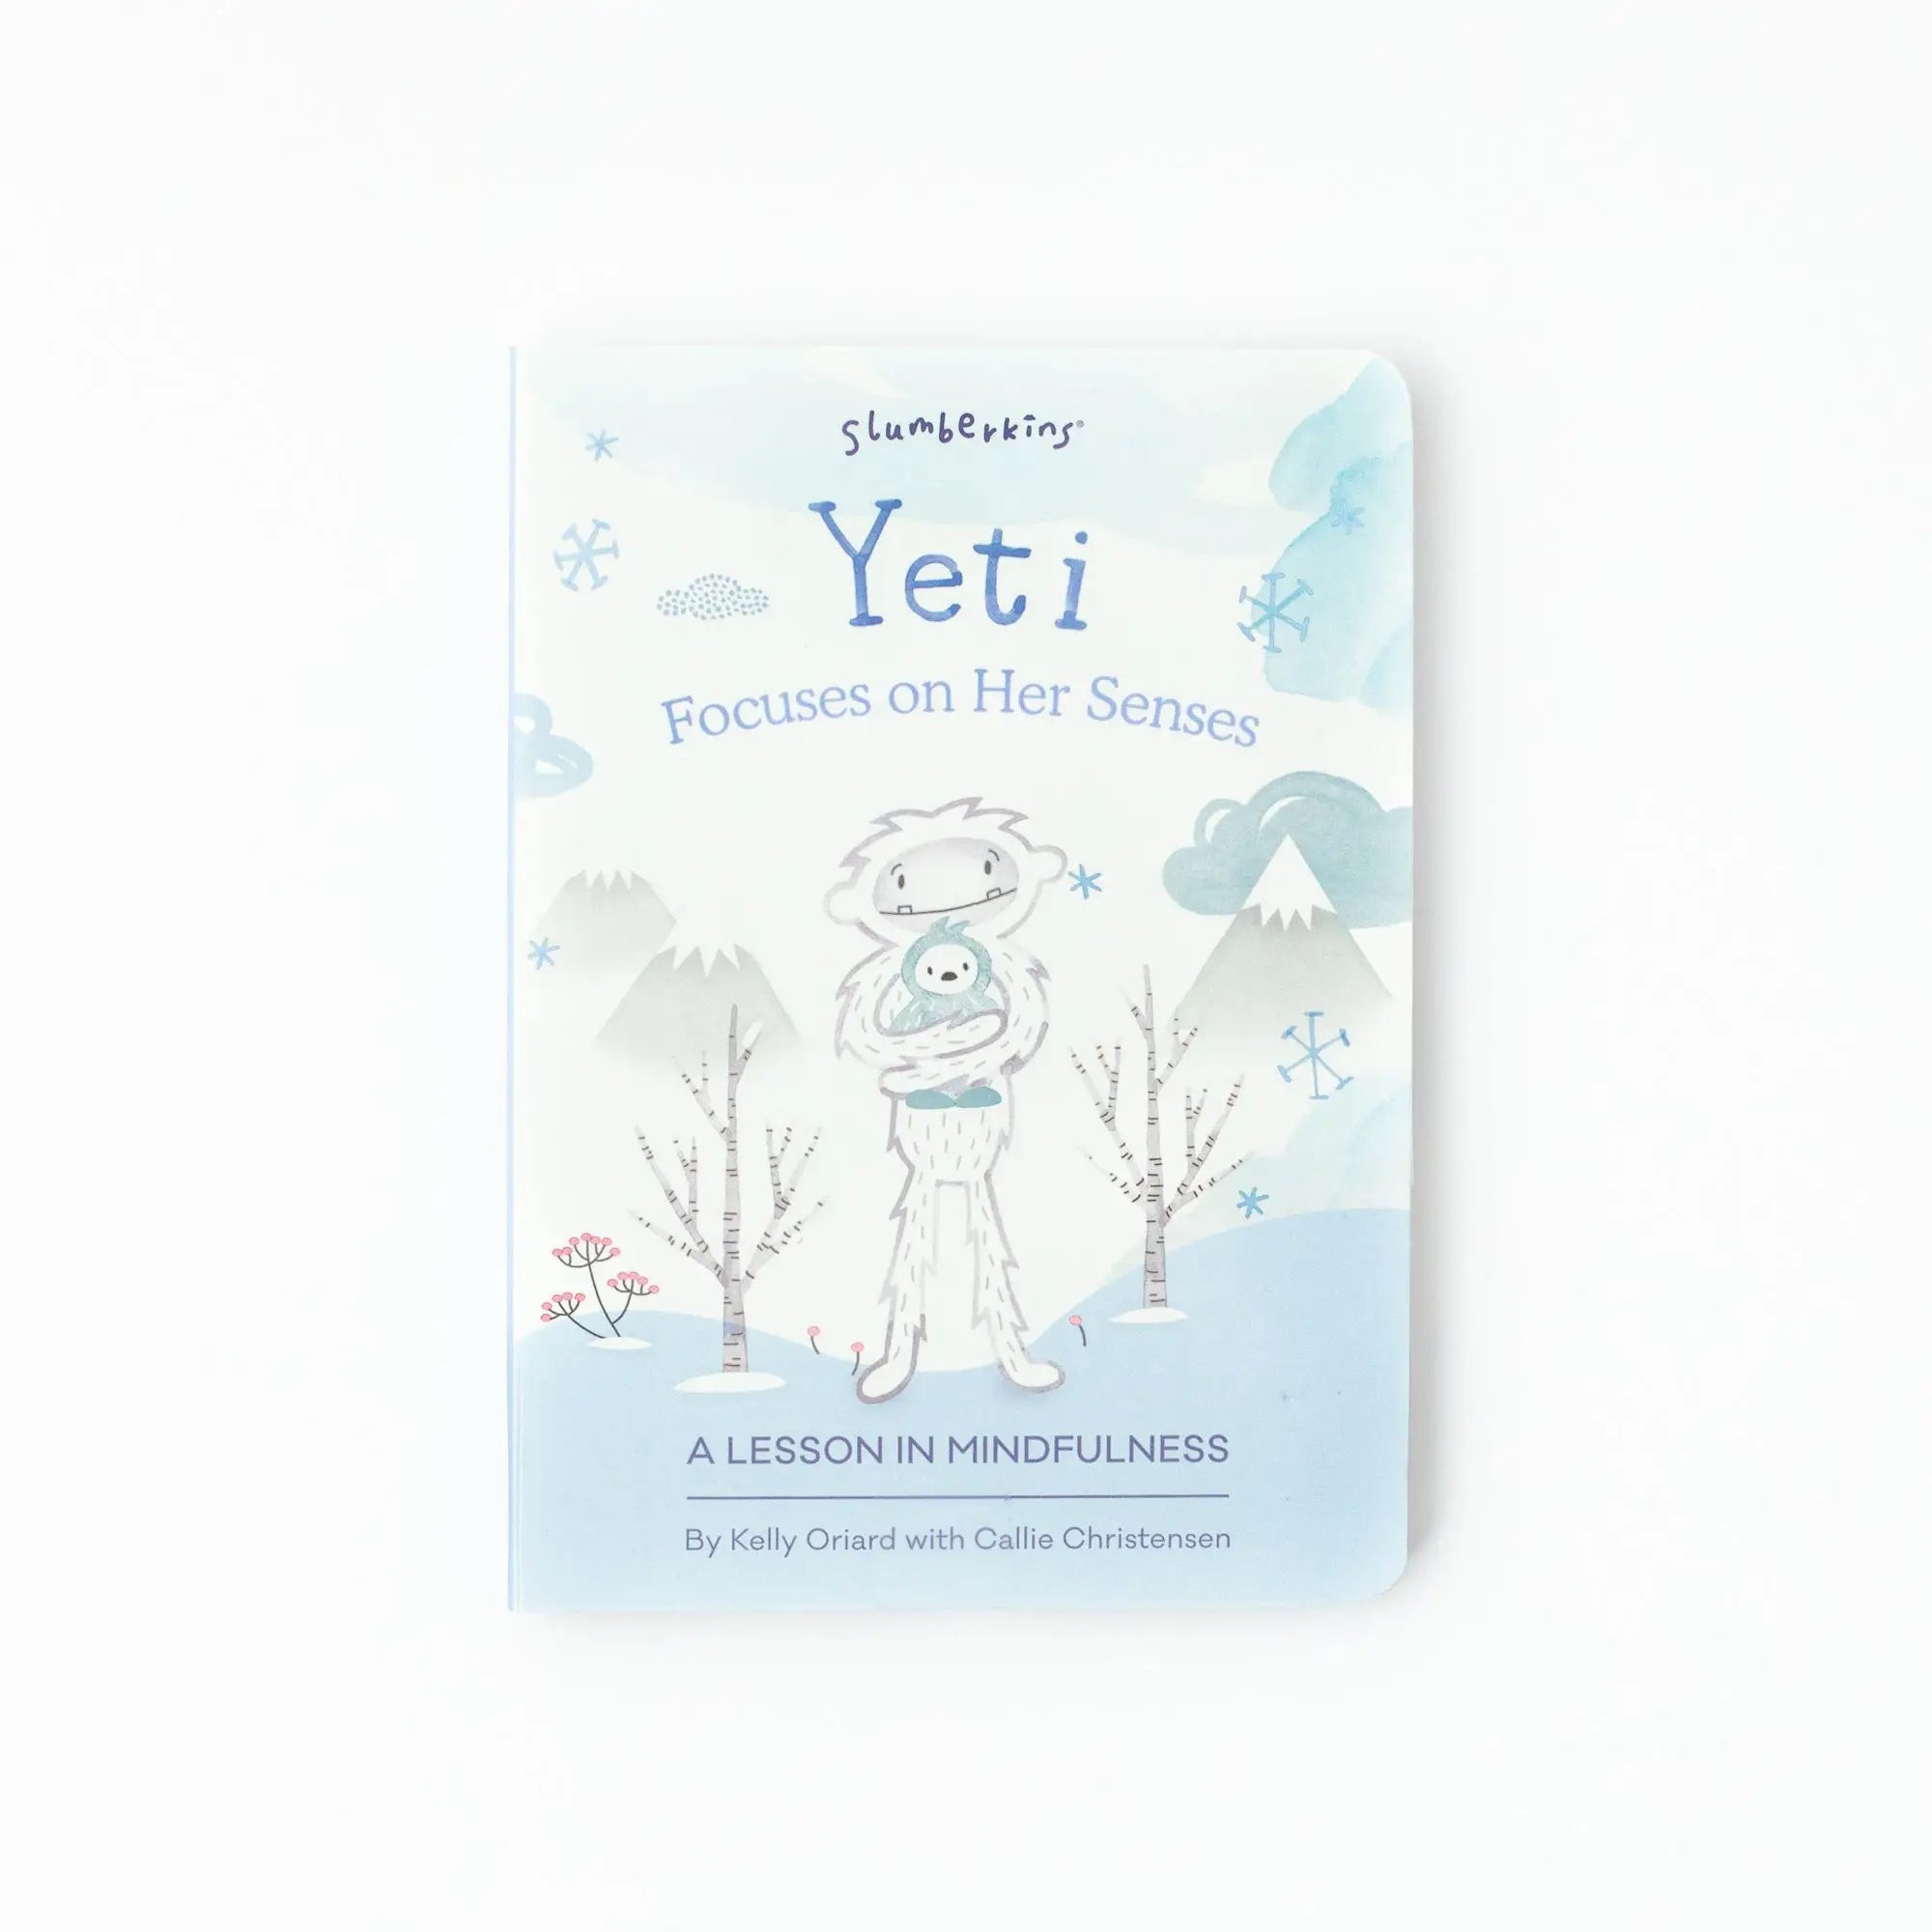 YETI FOCUSES ON HER SENSES: A LESSON IN MINDFULNESS